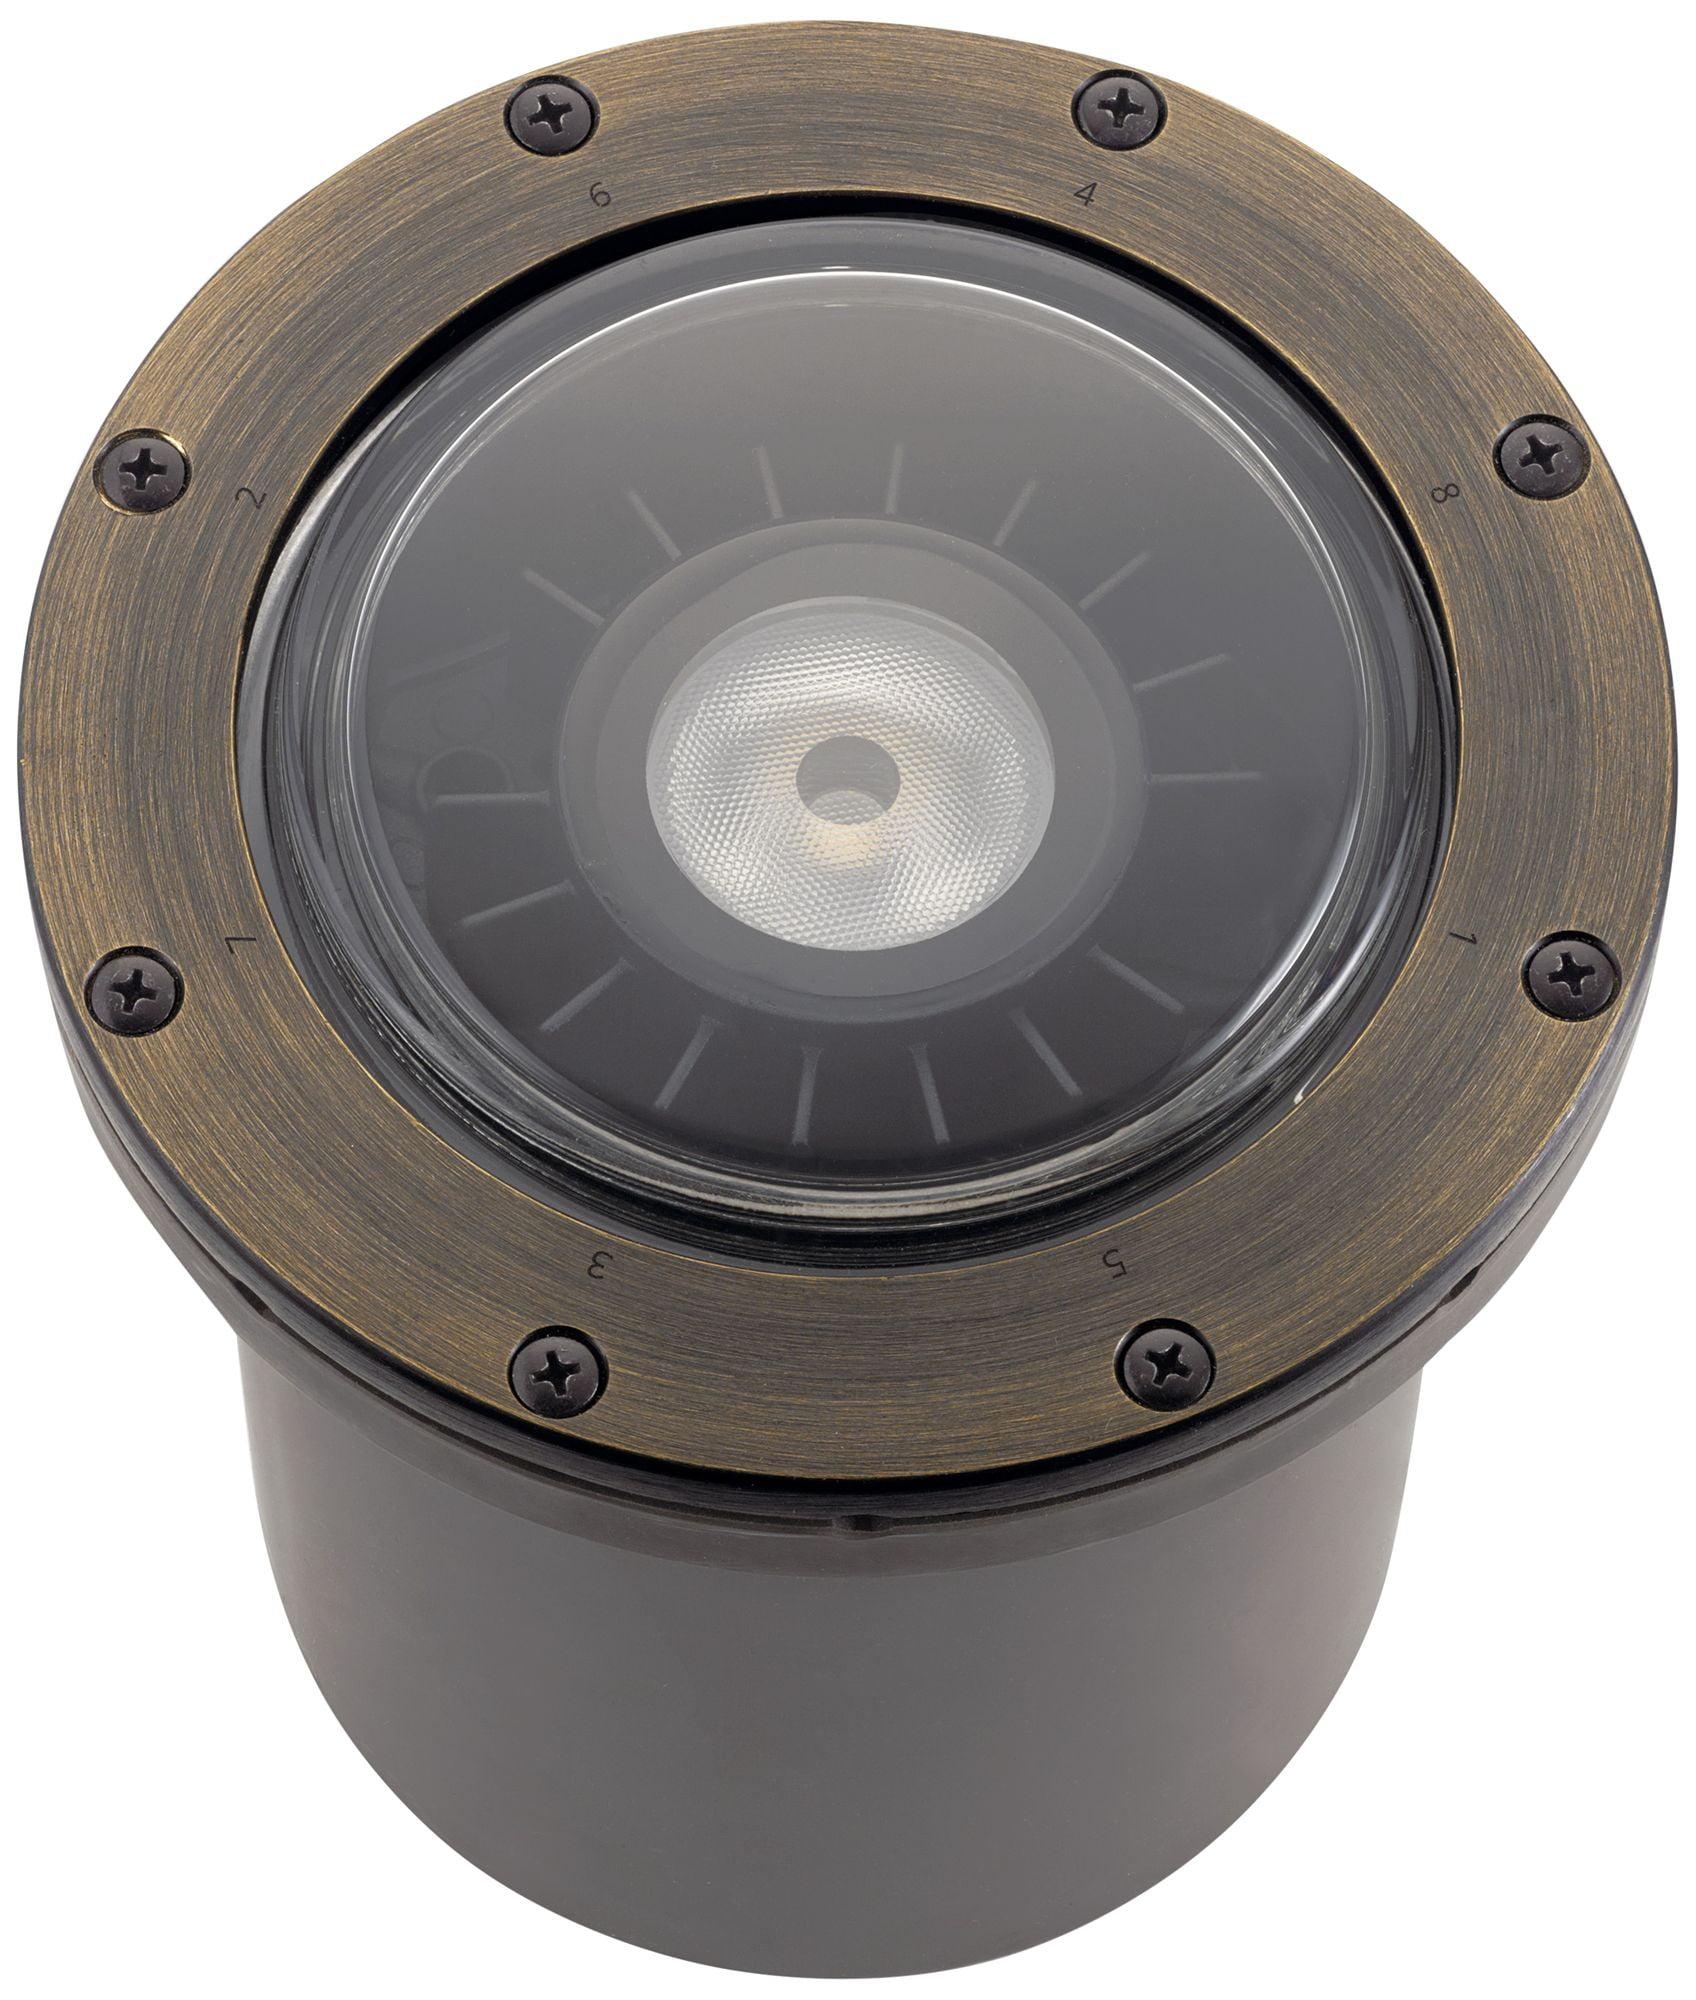 Modern Brass 6" LED In-Ground Security Light, Antique Finish